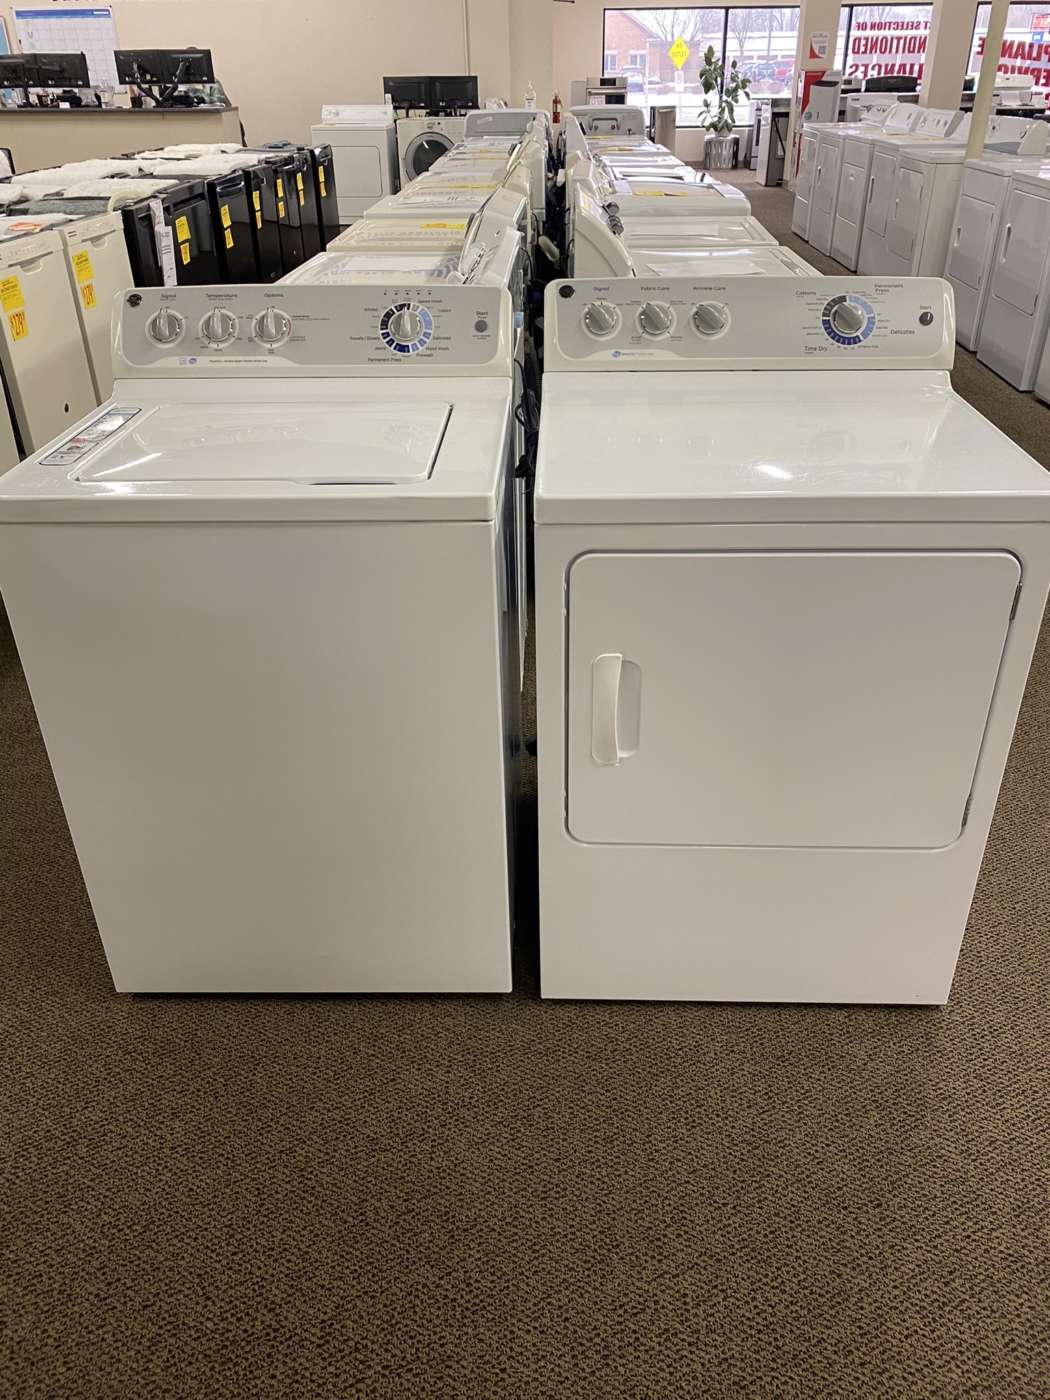 Reconditioned G/E 3.8 Cu. Ft. Top-Load H/E Washer & 7.0 Cu. Ft. Electric Dryer – White